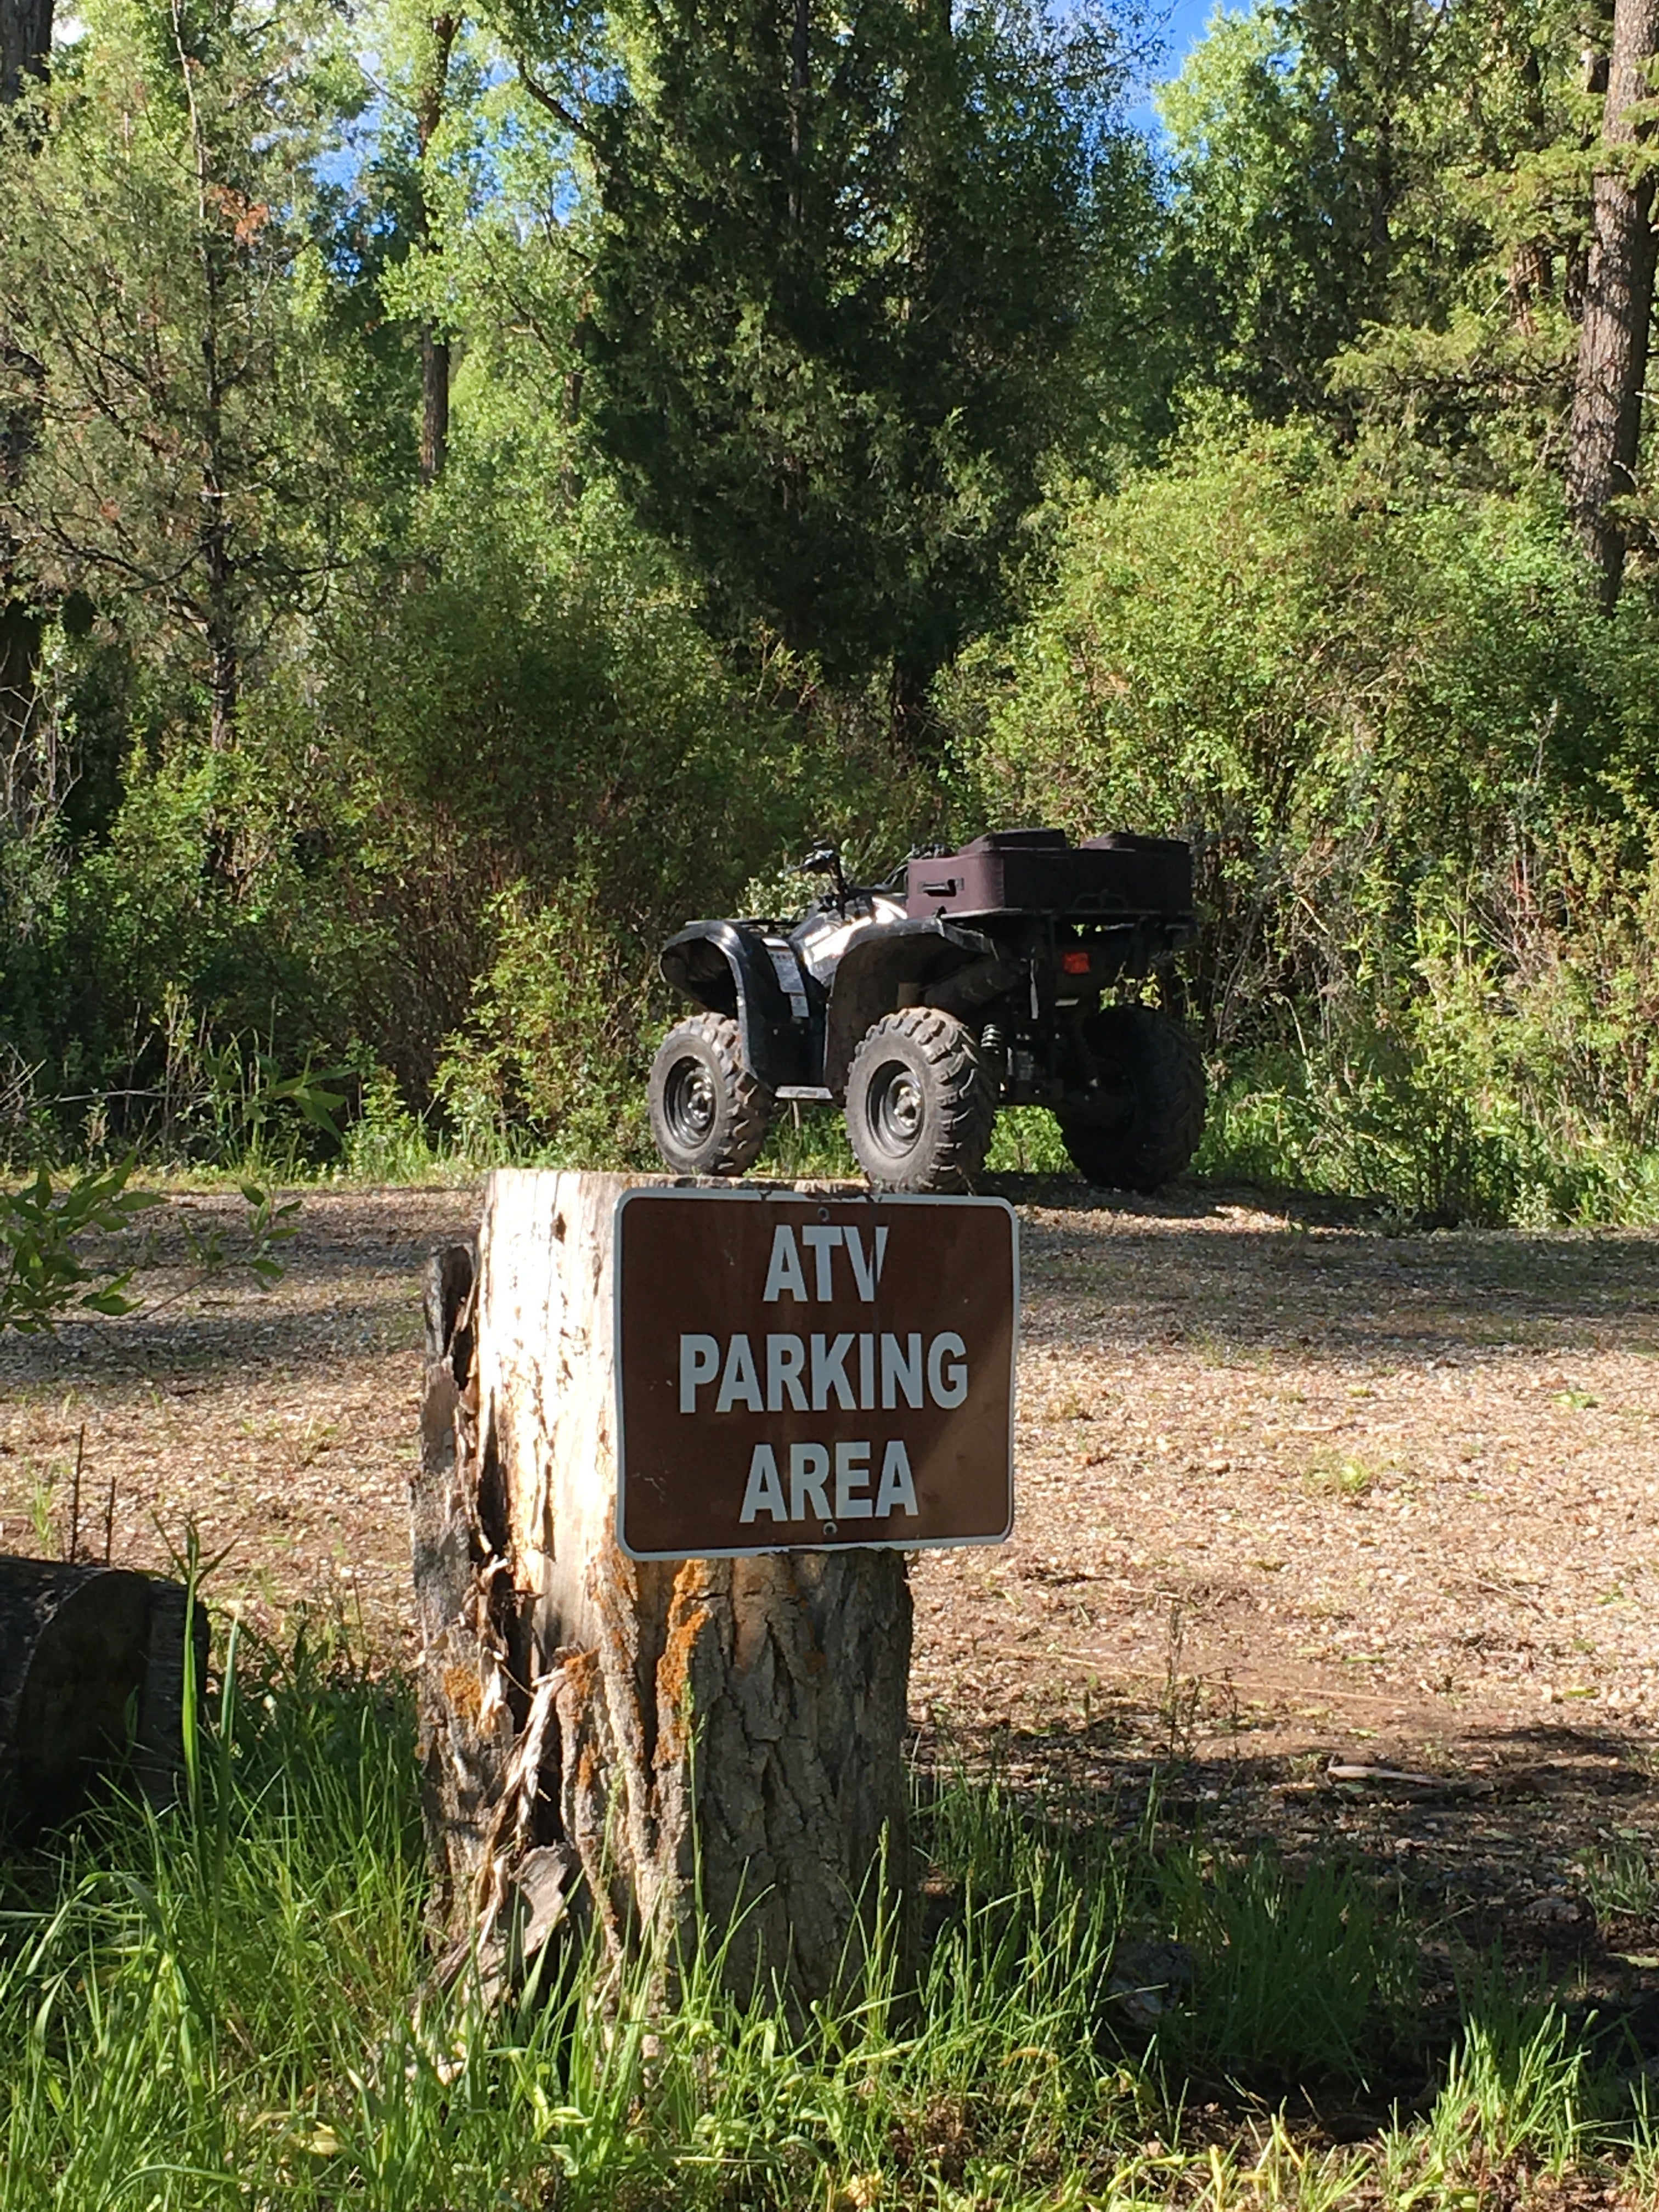 Loved that ATV's had their own parking outside the campground